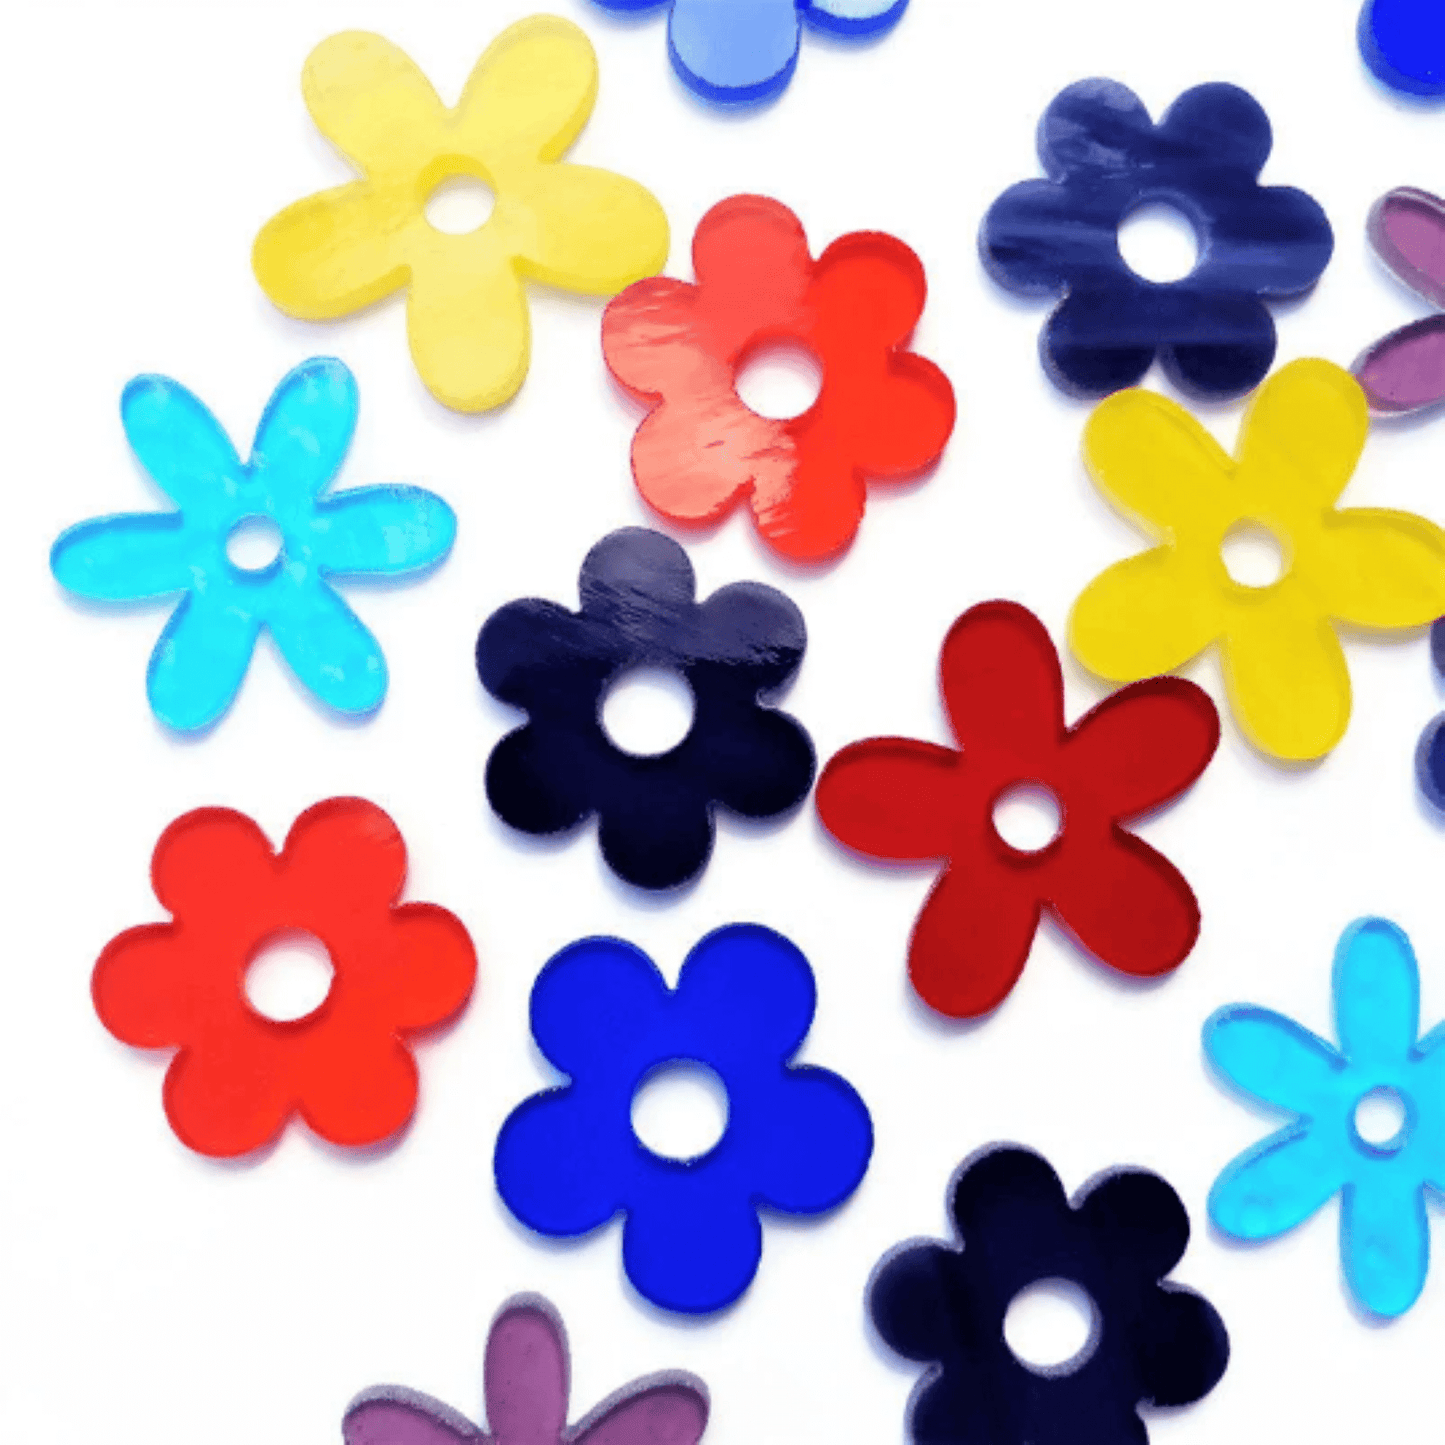 Precut Stained Glass Small Flowers, Assorted Colors, 1.5" Glass Hearts for Mosaics, Jewelry, Stained Glass cute little flowers